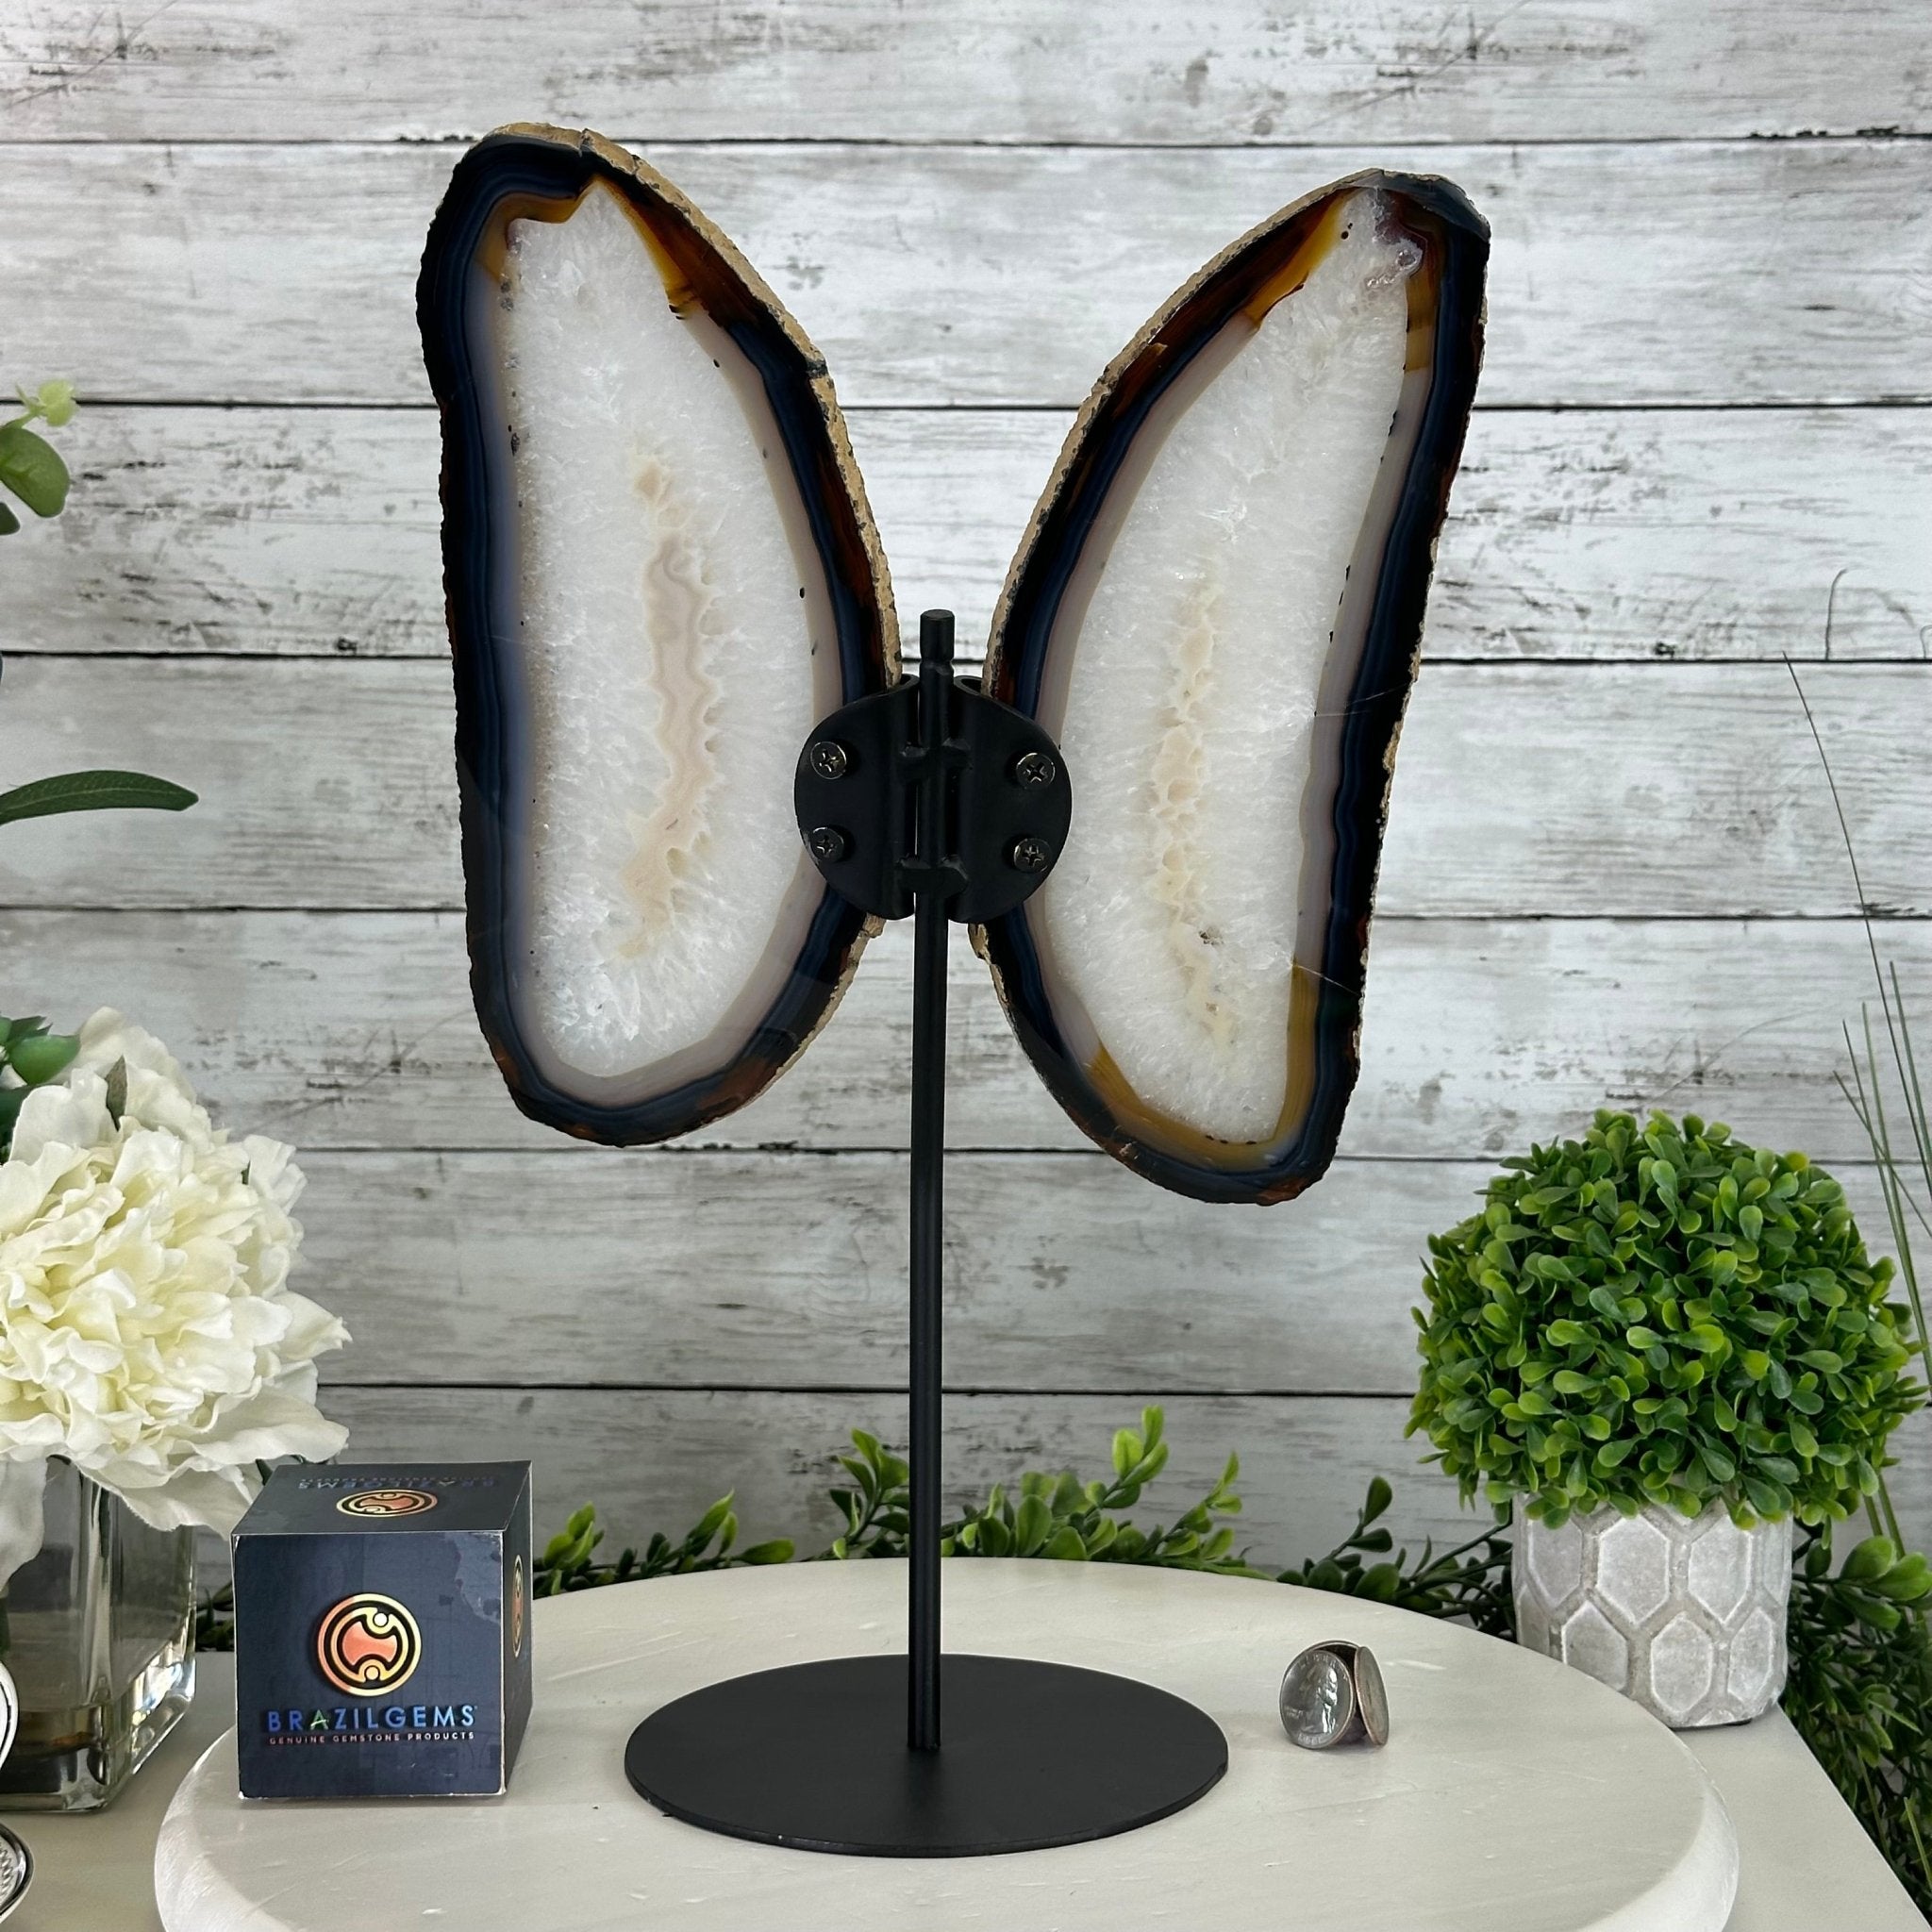 Natural Brazilian Agate "Butterfly Wings", 15.75" Tall #5050NA-084 - Brazil GemsBrazil GemsNatural Brazilian Agate "Butterfly Wings", 15.75" Tall #5050NA-084Agate Butterfly Wings5050NA-084